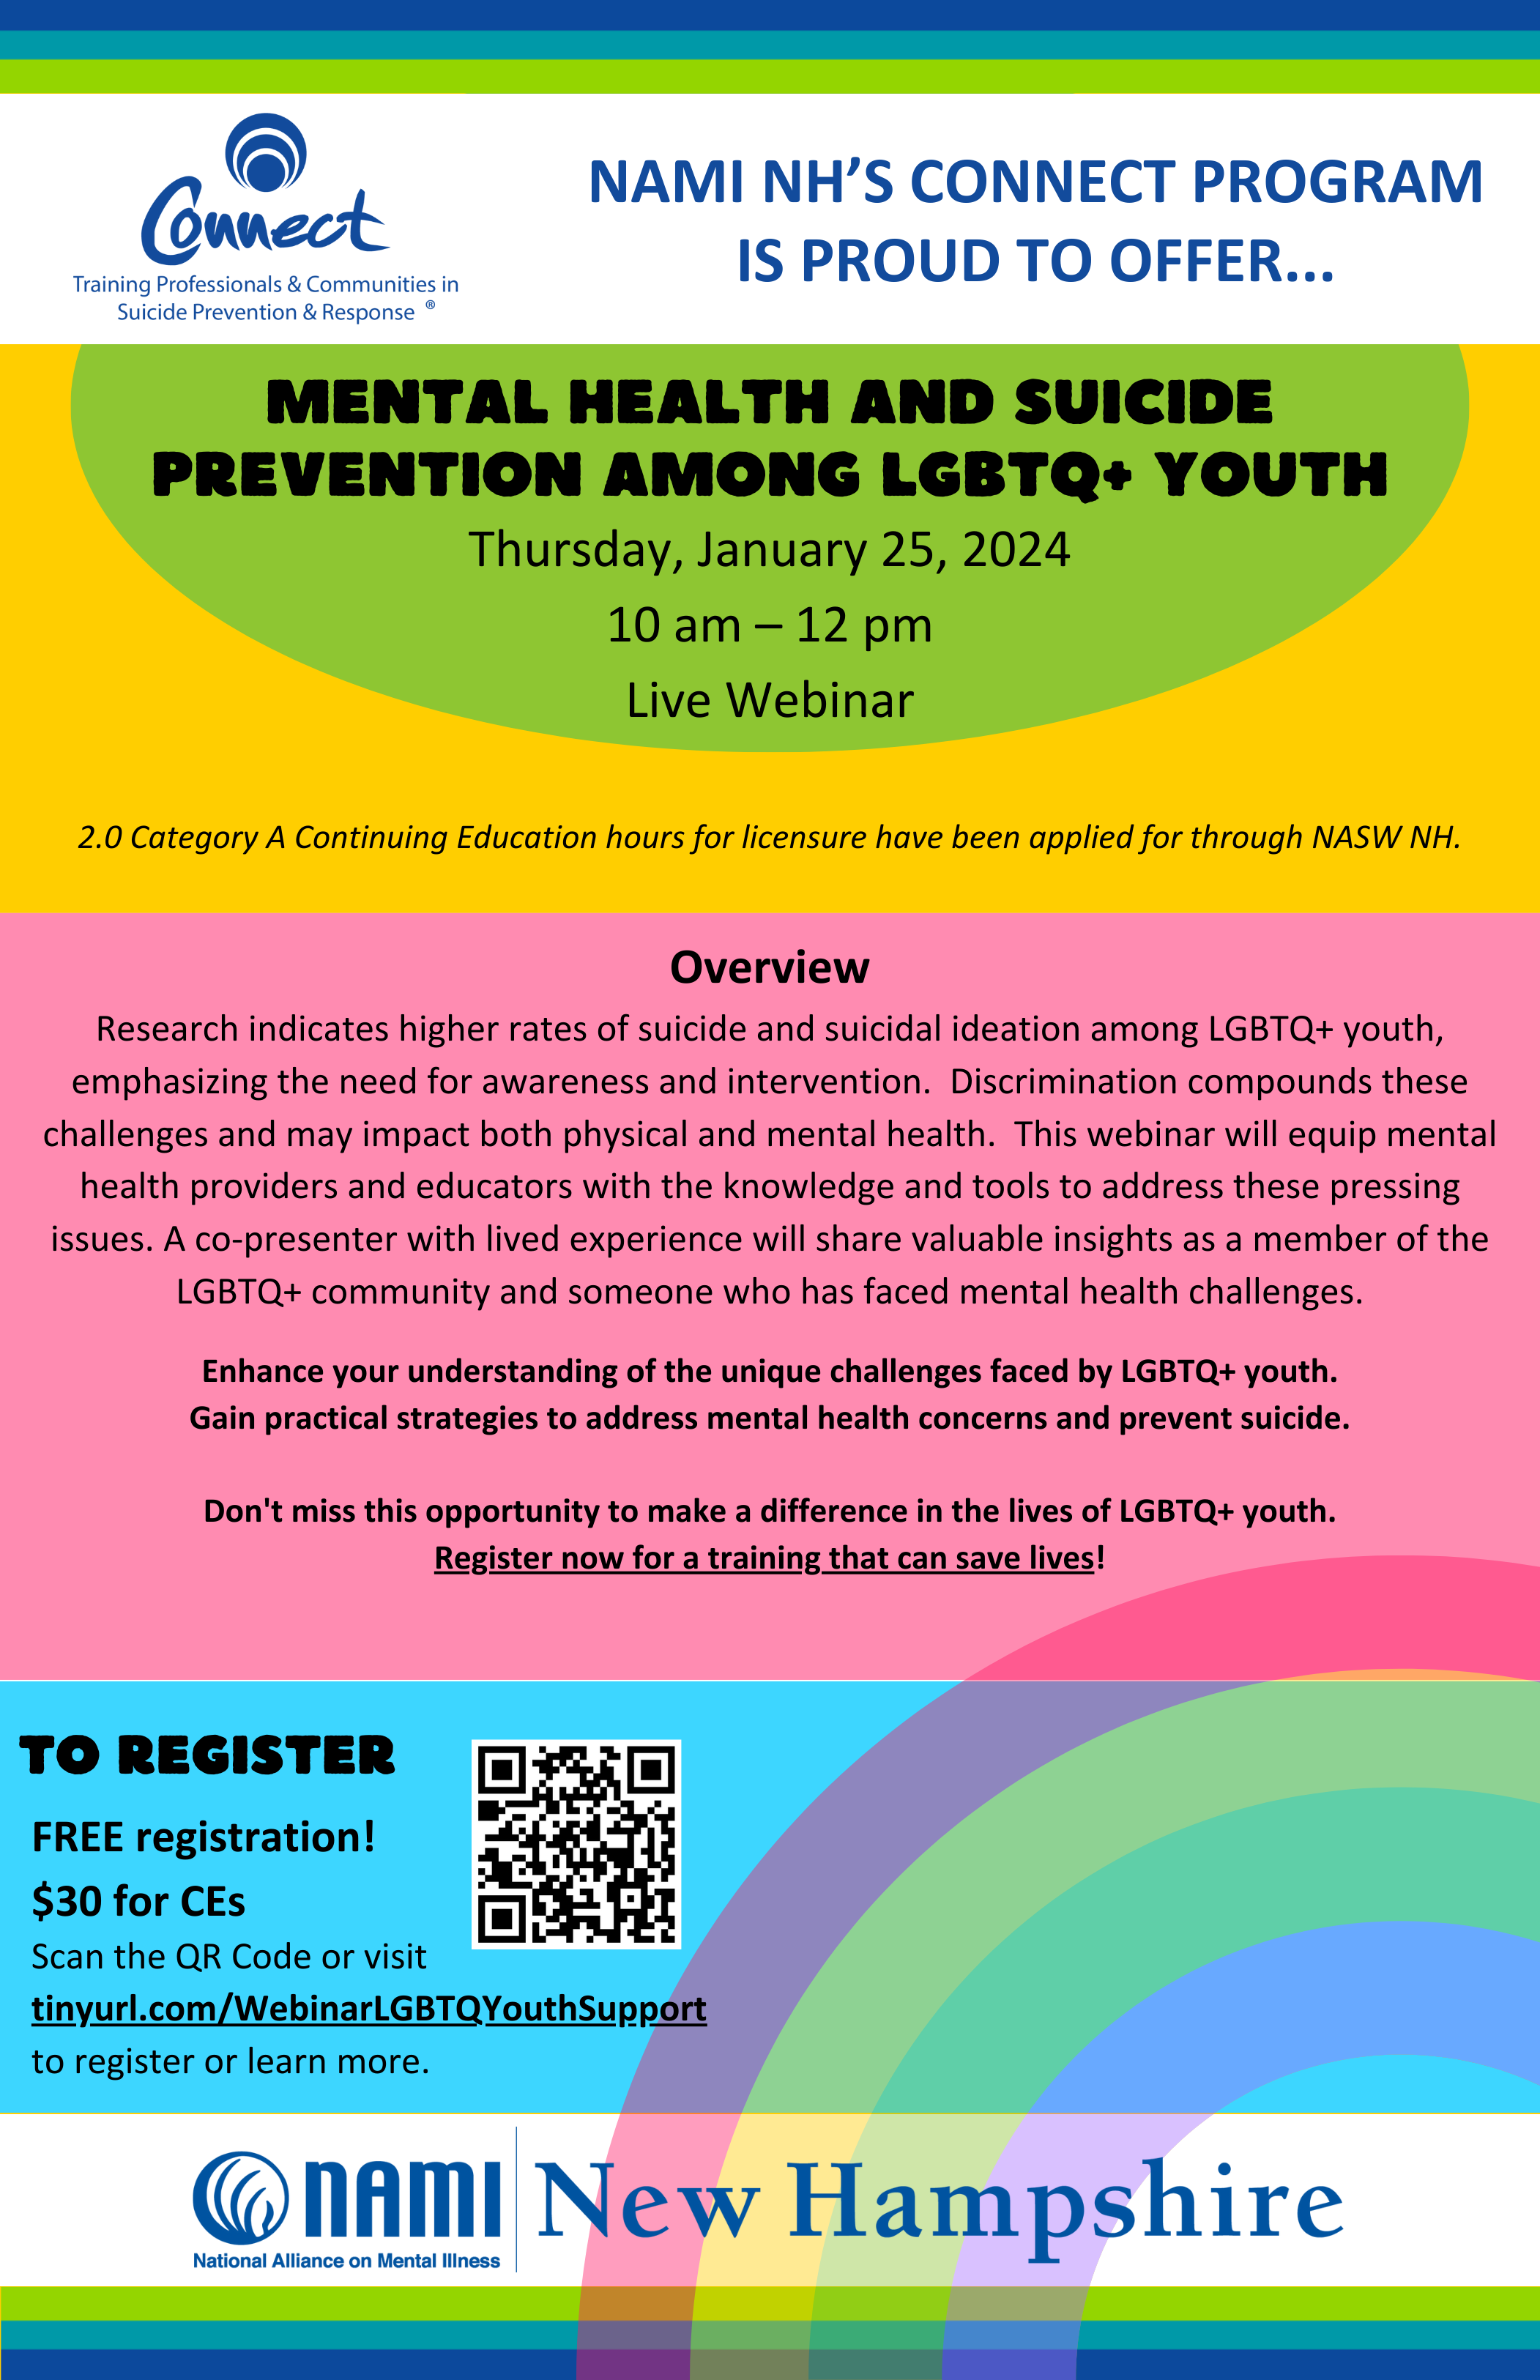 Mental Health and Suicide Prevention Among LGBTQ+ Youth